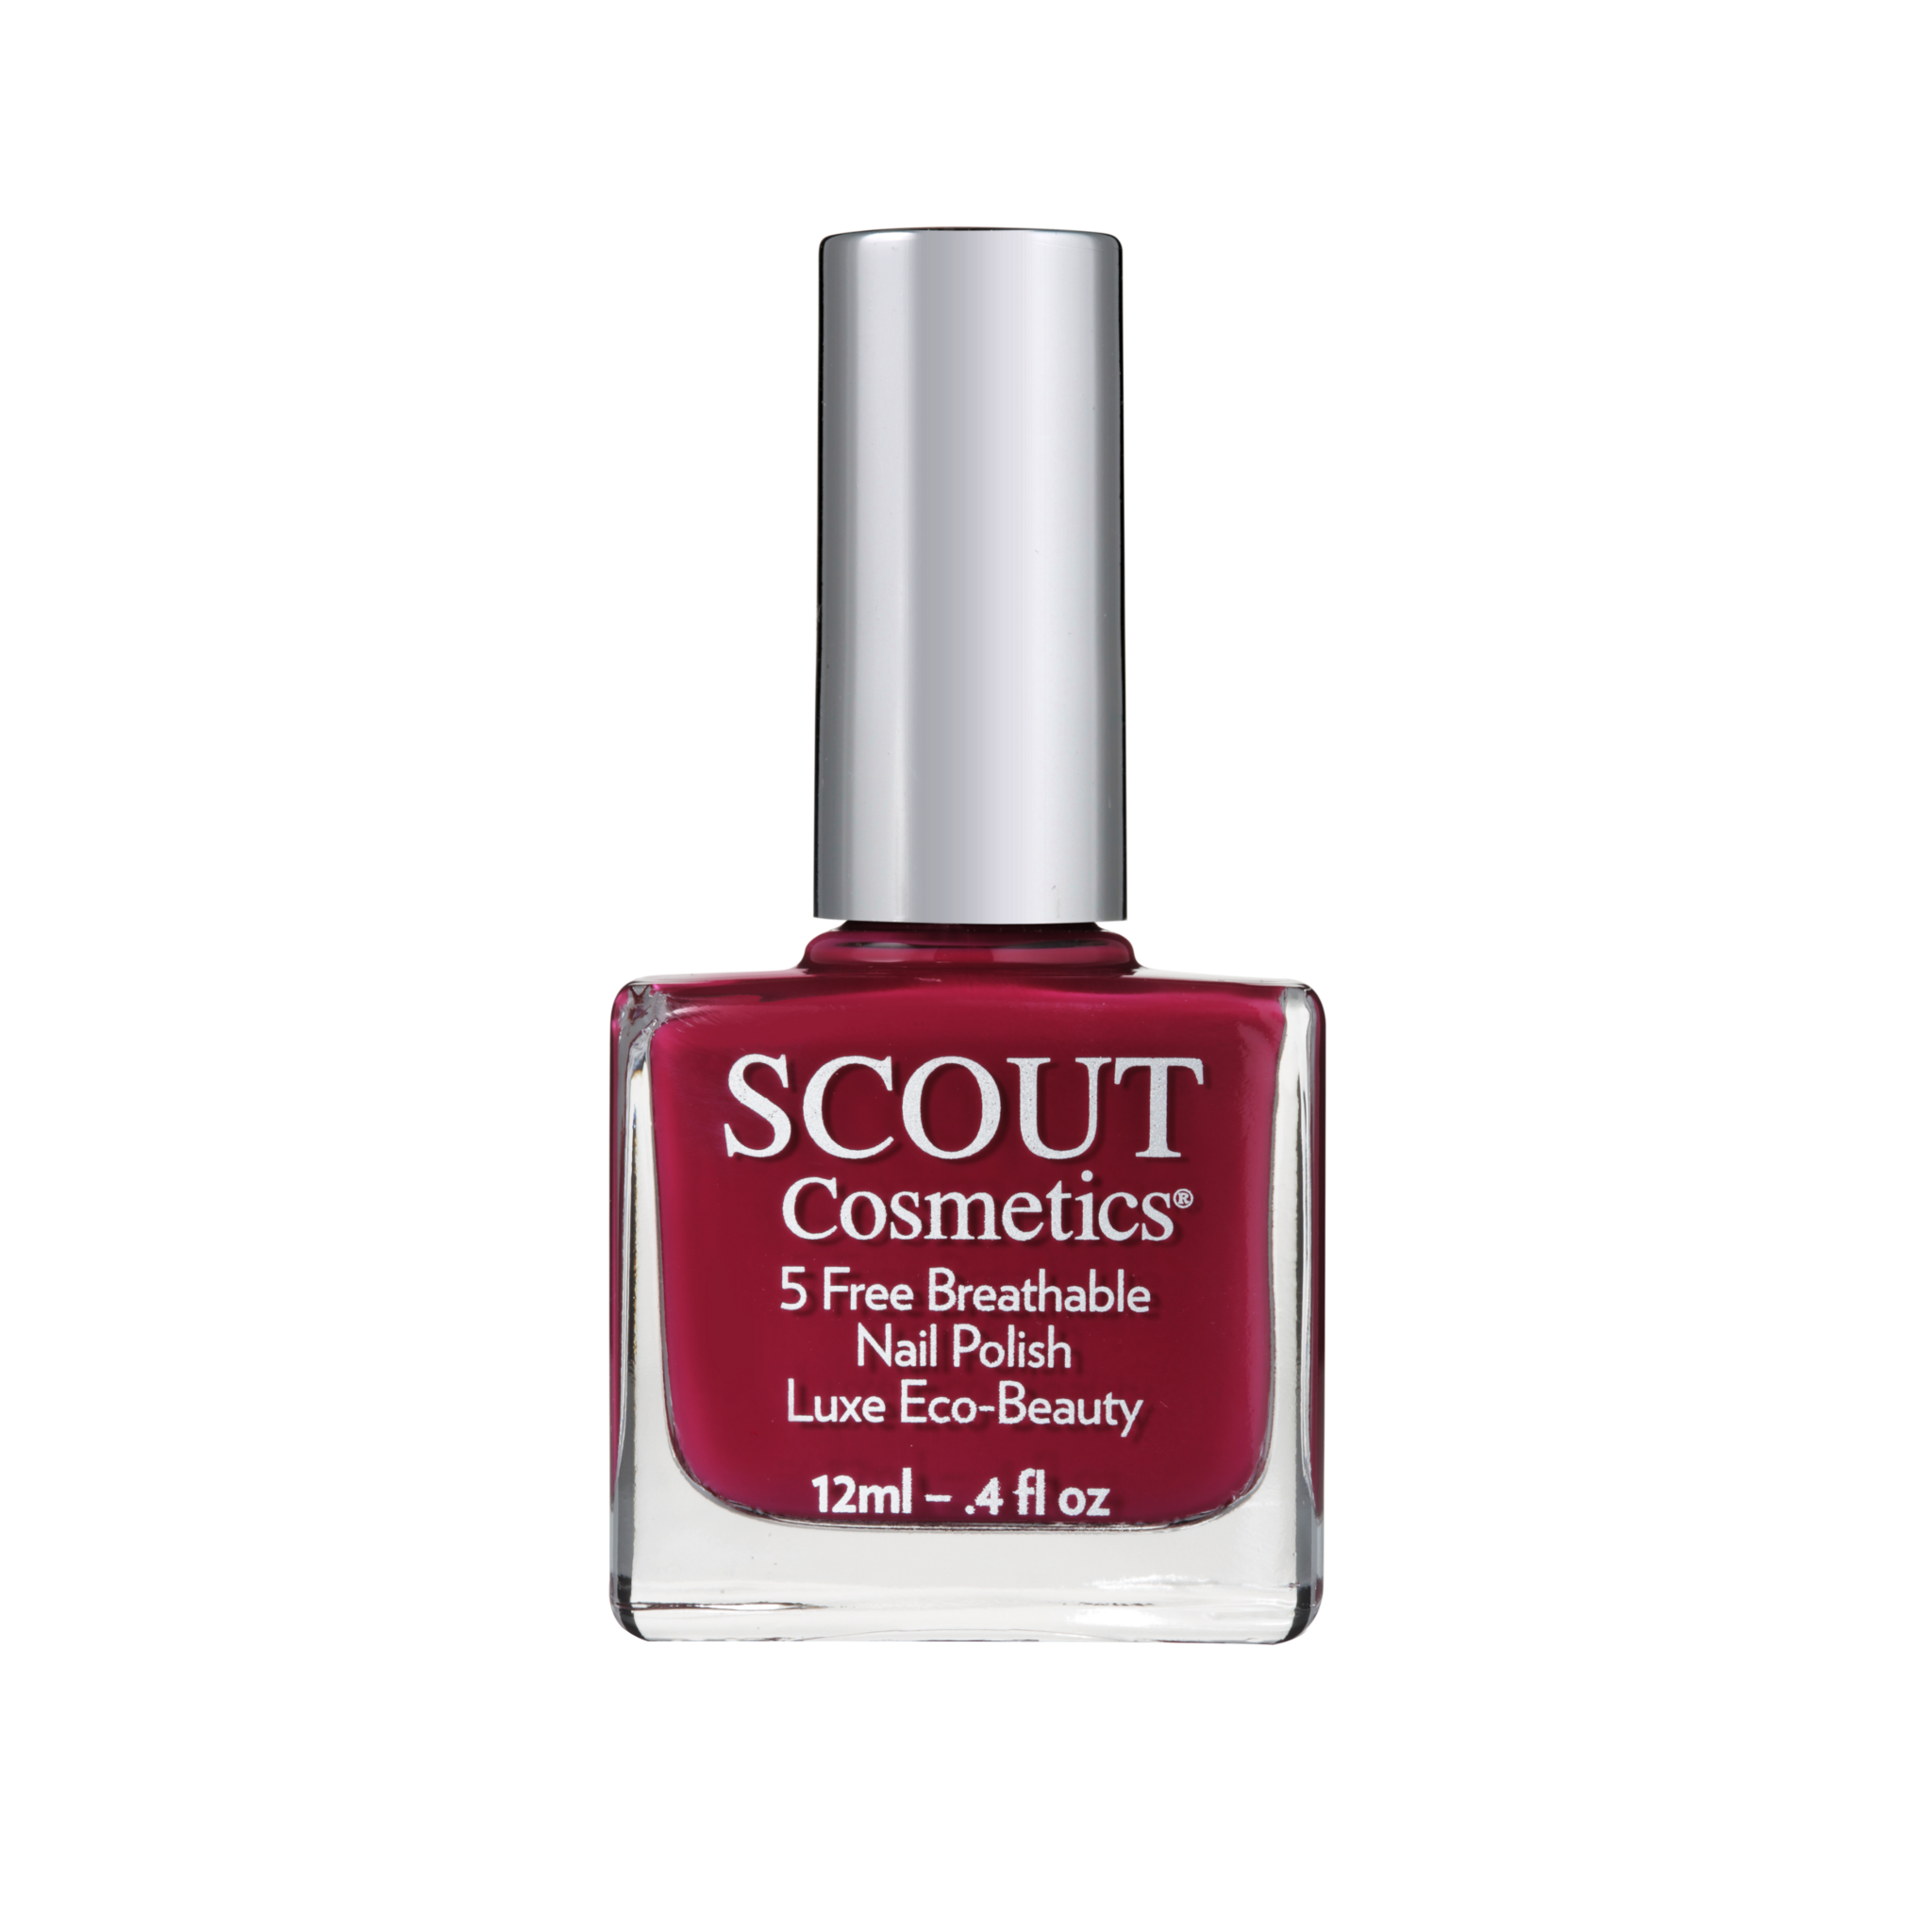 SCOUT Cosmetics Nail Polish - Spice Up Your Life